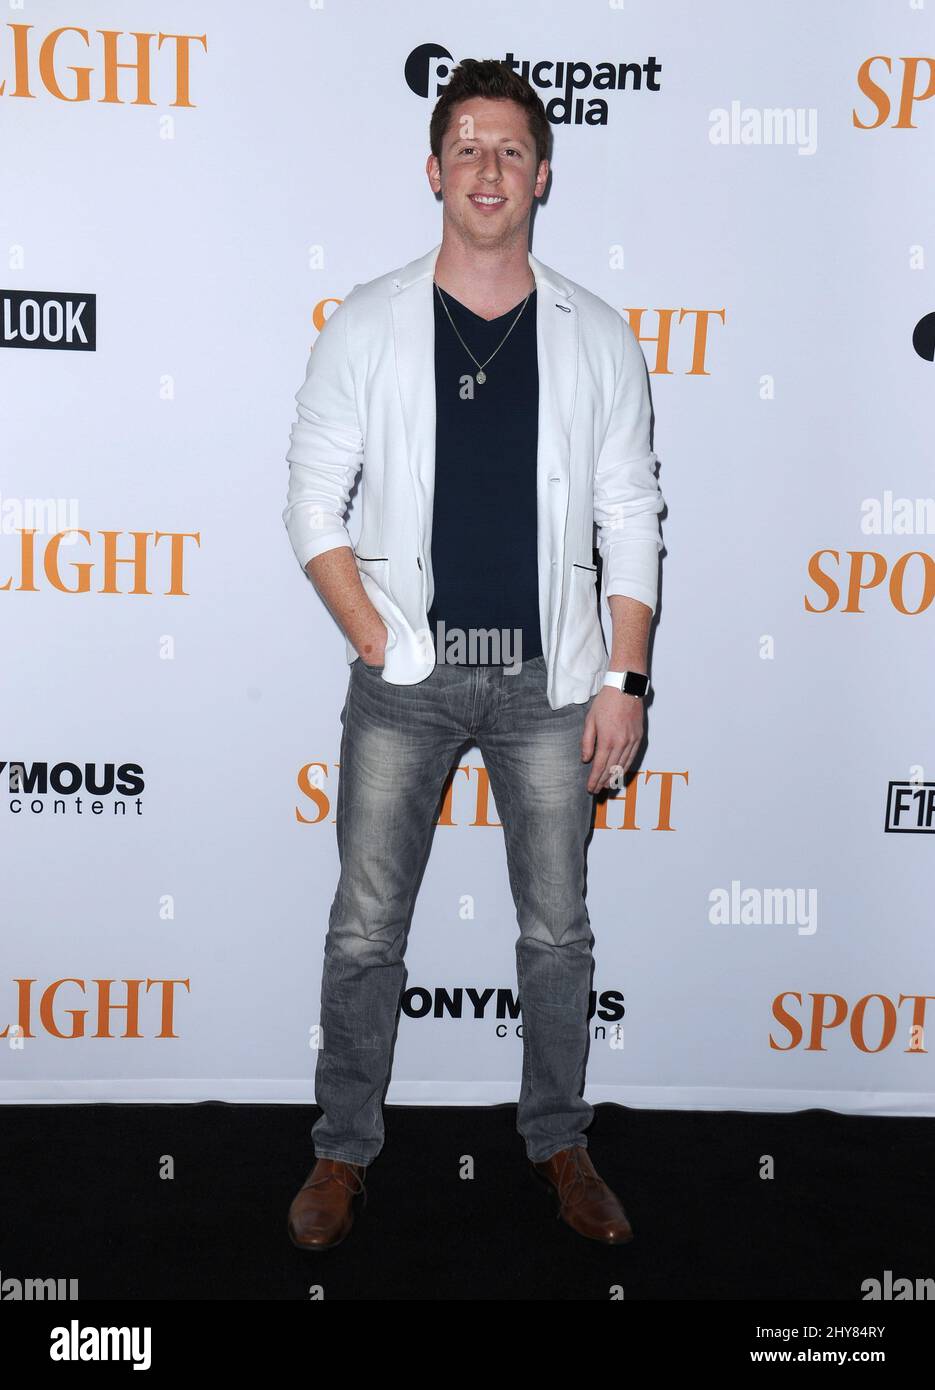 Kevin Michael Martin arriving for the Spotlight Spotlight premiere held at DGA Theater, Los Angeles. Stock Photo